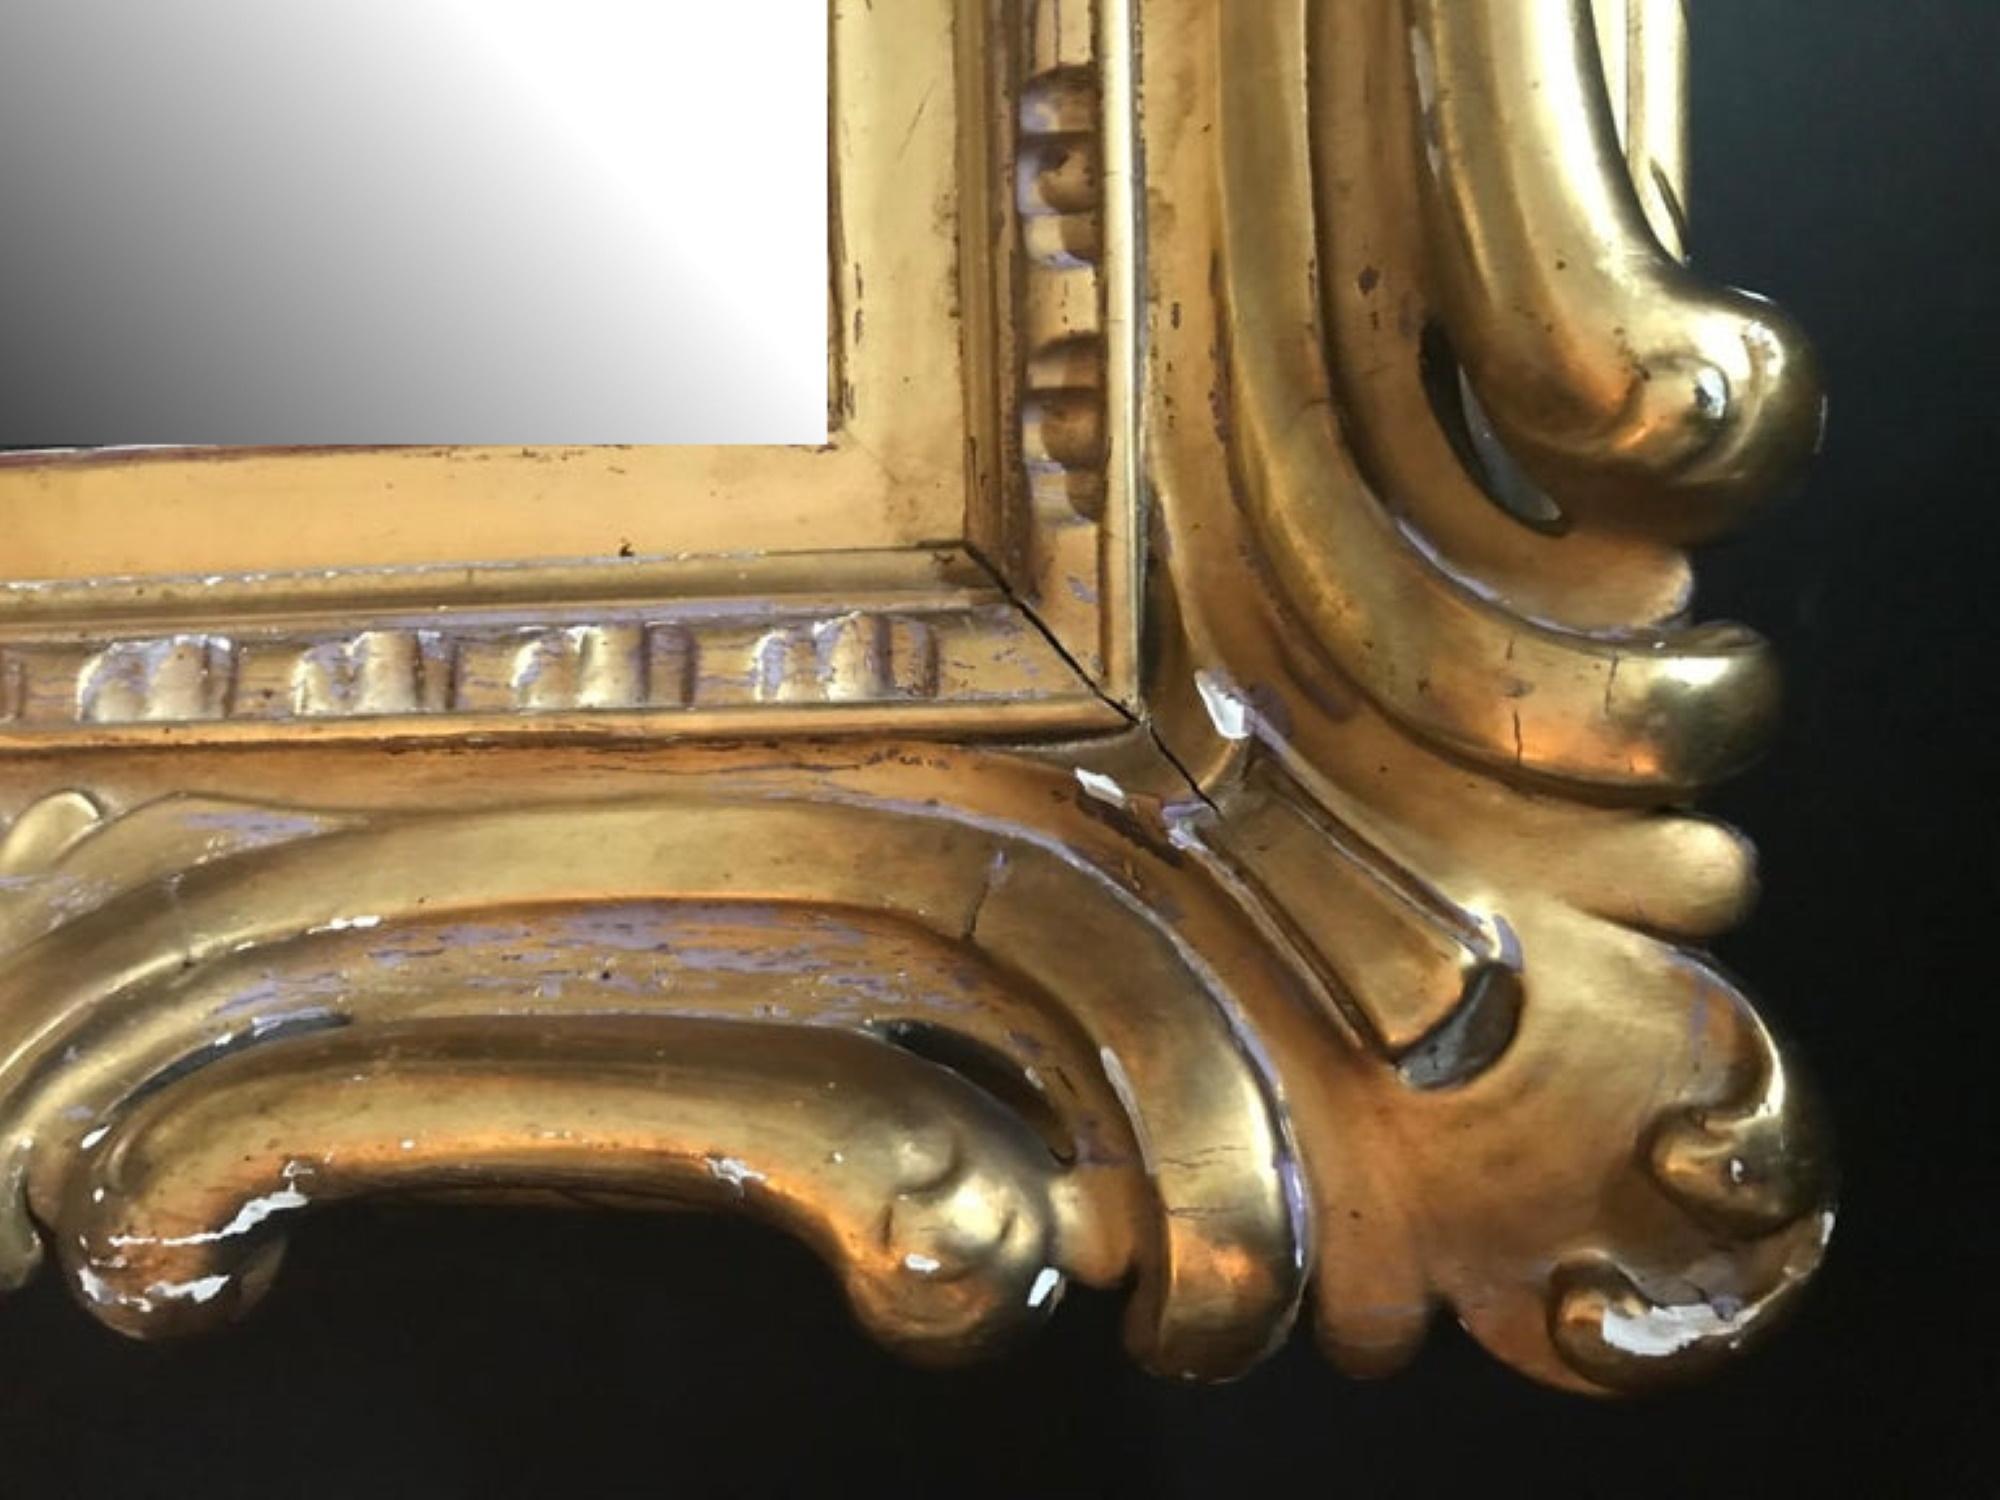 This is a magnificent antique Venetian Sansovino style high relief carved, richly water gilded and highly burnished framed mirror. It is certainly an outstanding 19th century large scaled museum quality piece. The opulent and bold carving makes a